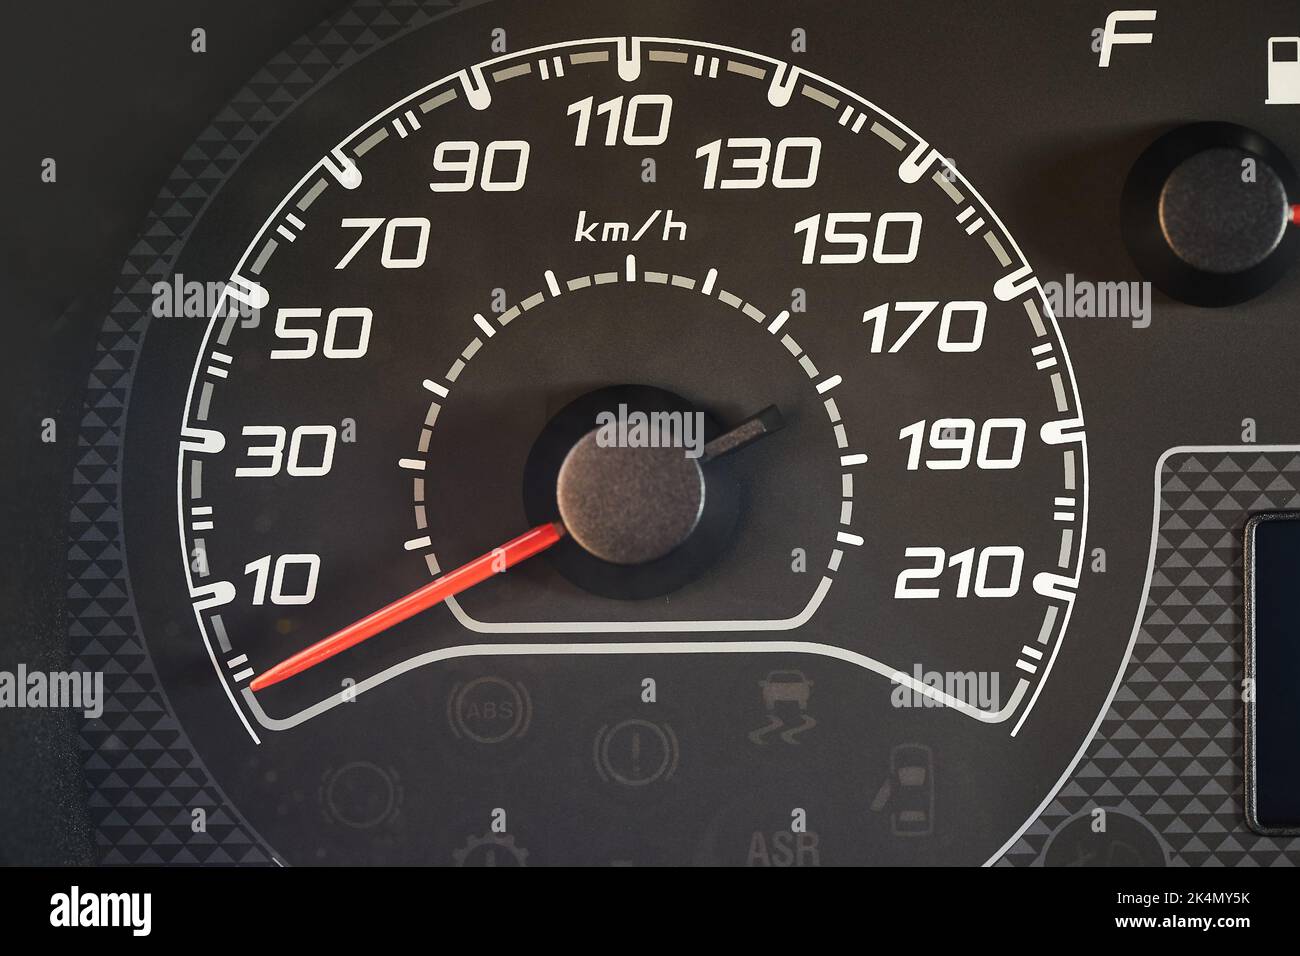 Speedometer of a car Stock Photo